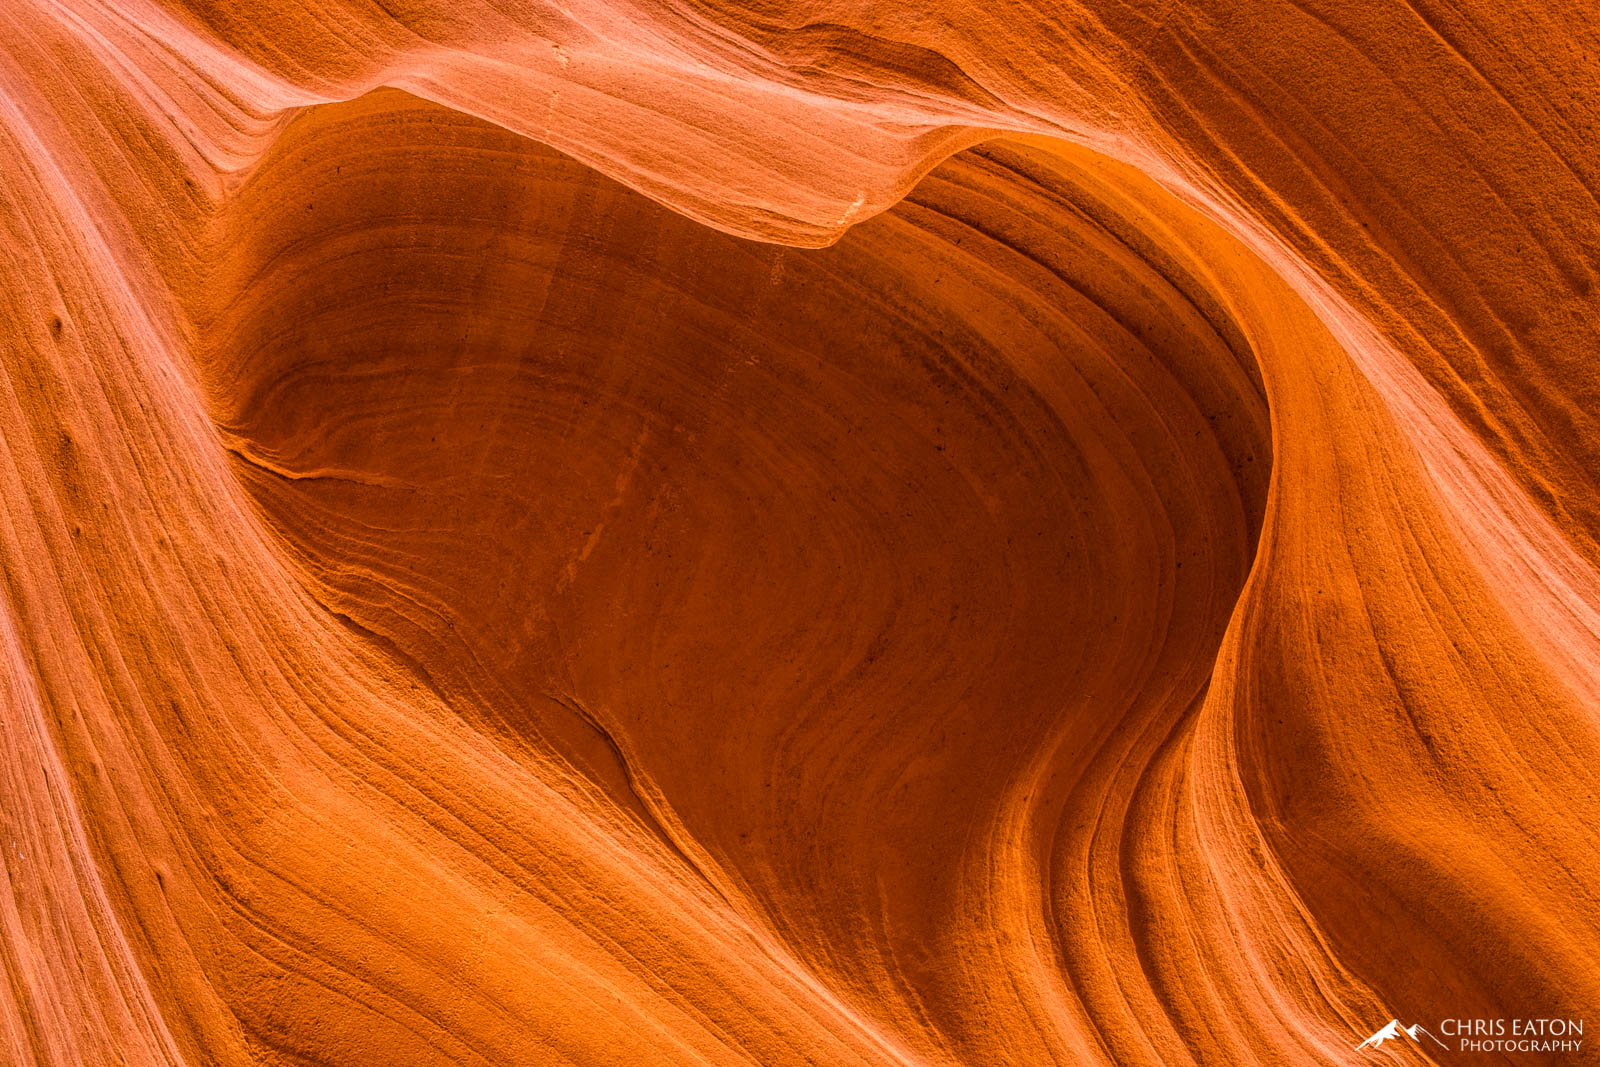 Flash flood waters carve many shapes and forms into the slot canyon walls. Sometimes, at just the right angle, they shapes and...